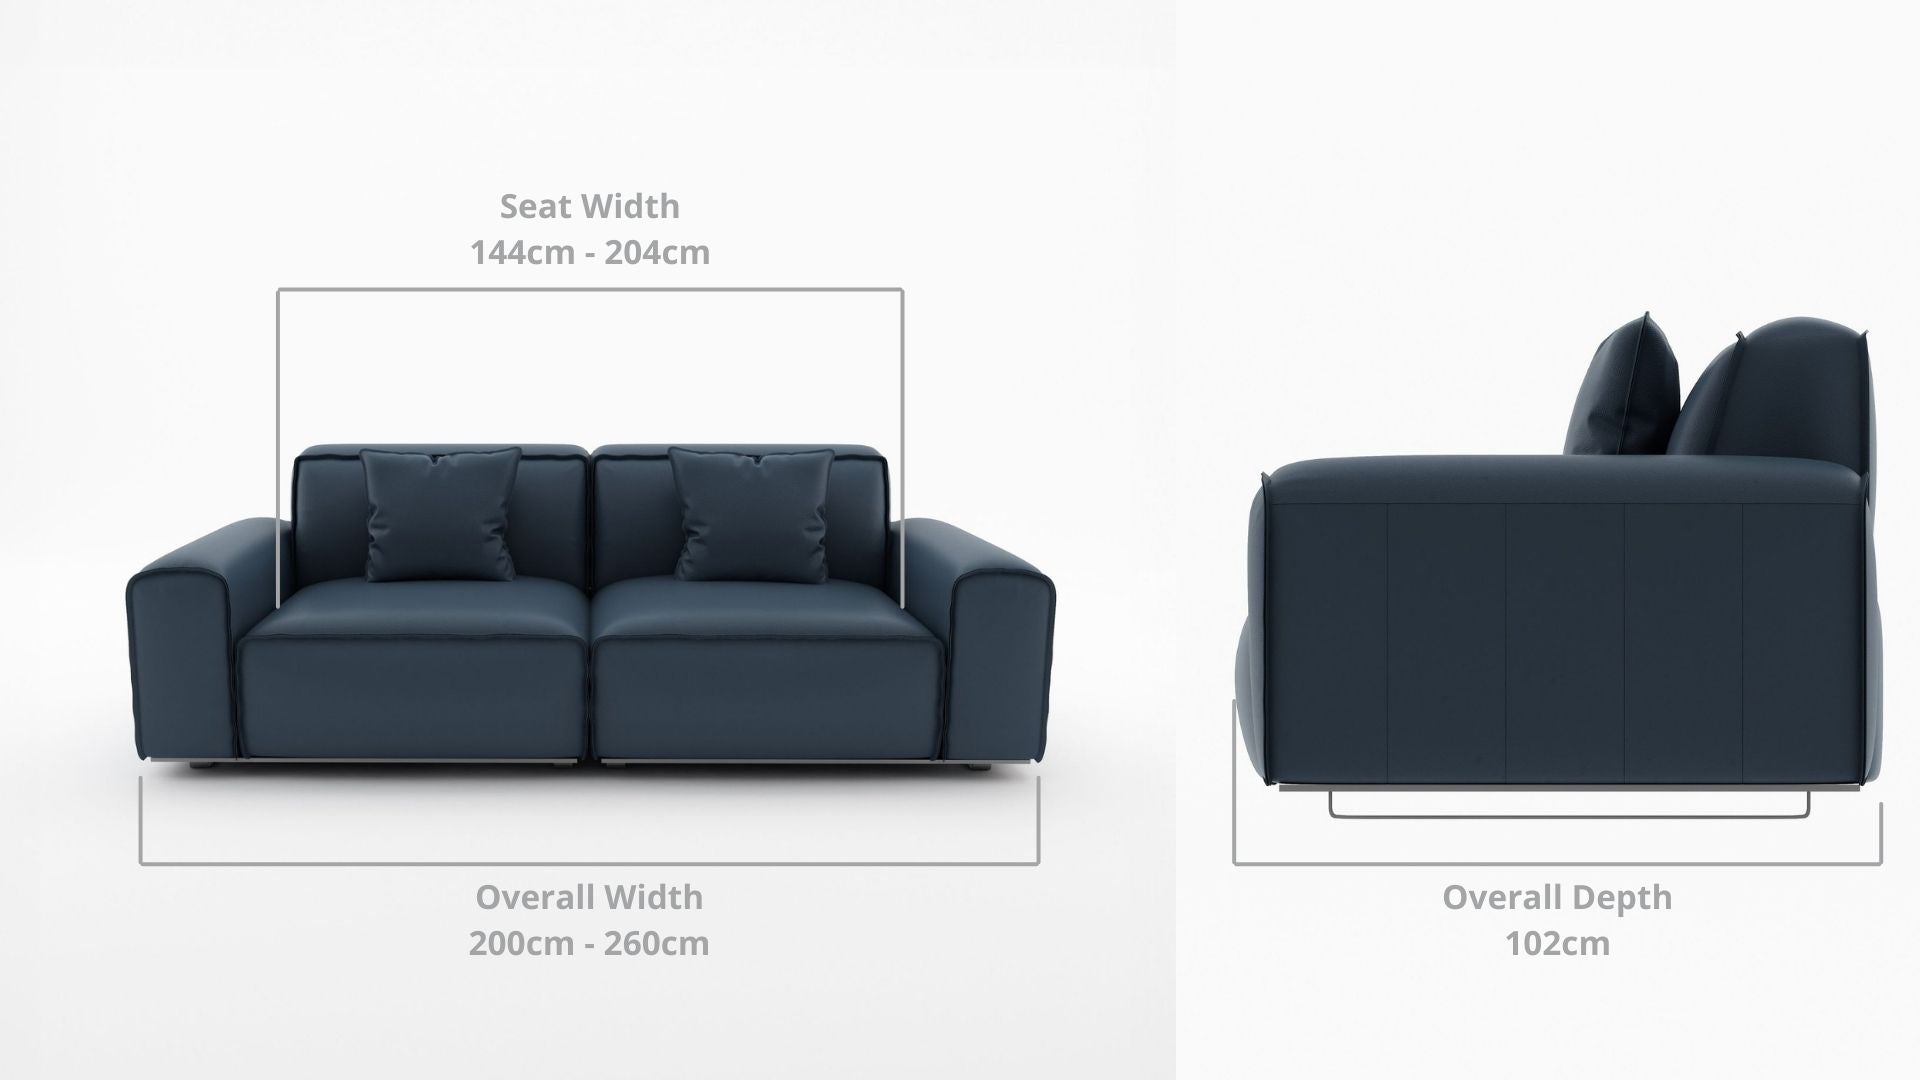 Details the key dimensions in terms of overall width, overall depth and seat width for Colby Half Leather Sofa